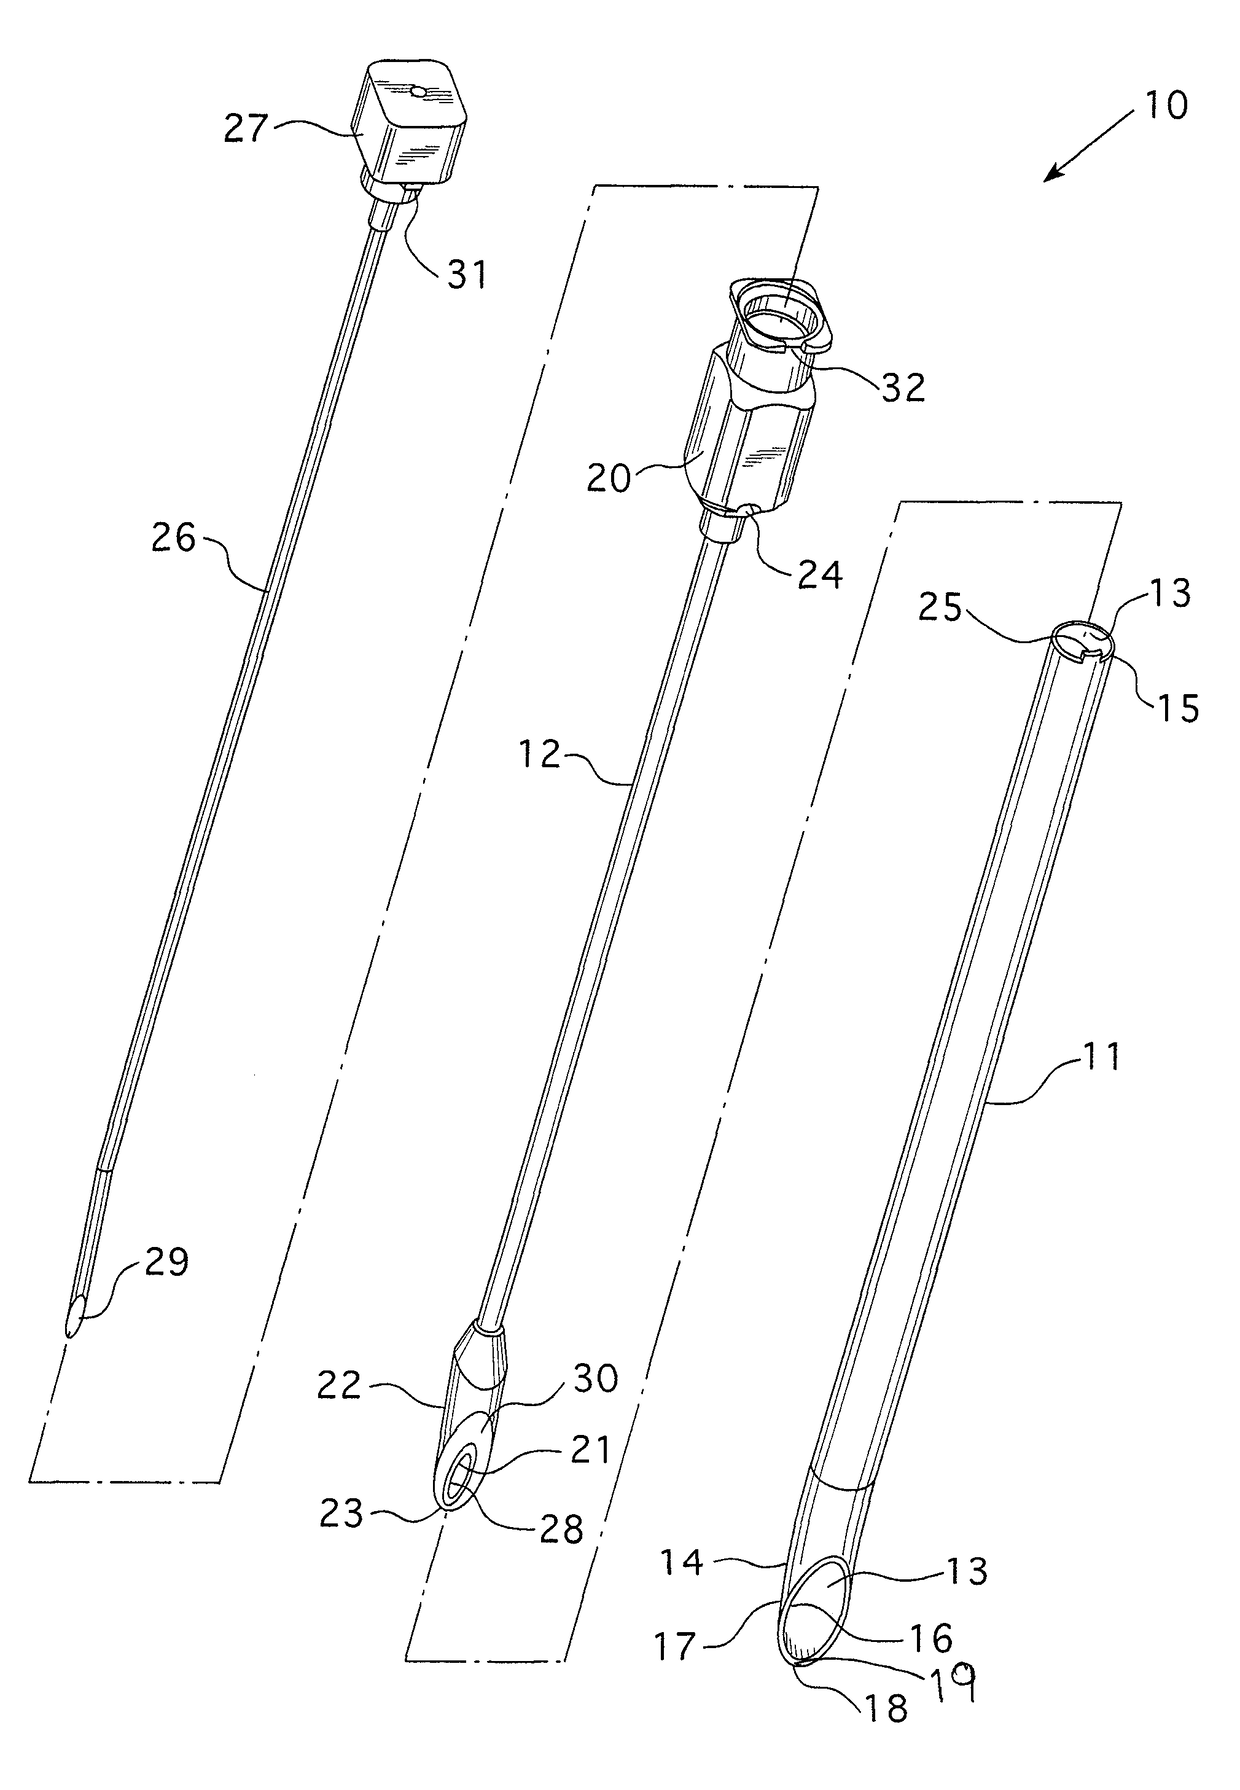 Apparatus and method for safely inserting an introducer needle into epidural space